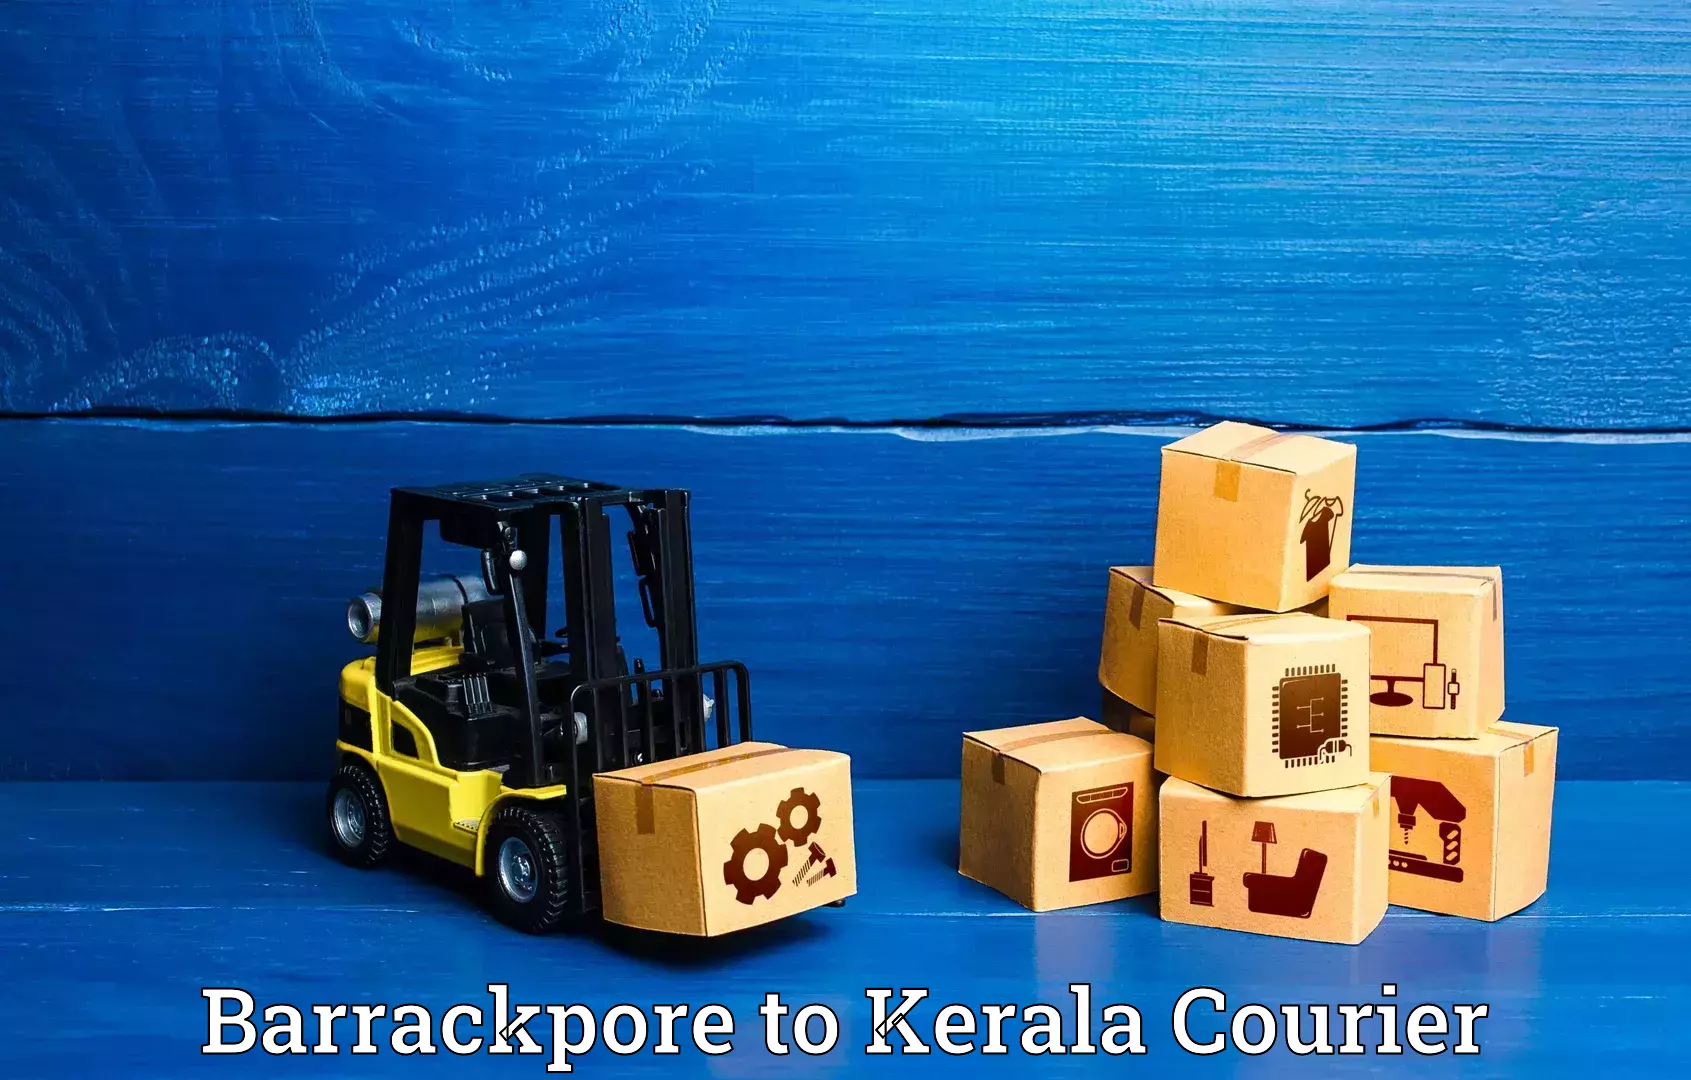 Luggage shipment tracking Barrackpore to Cochin University of Science and Technology